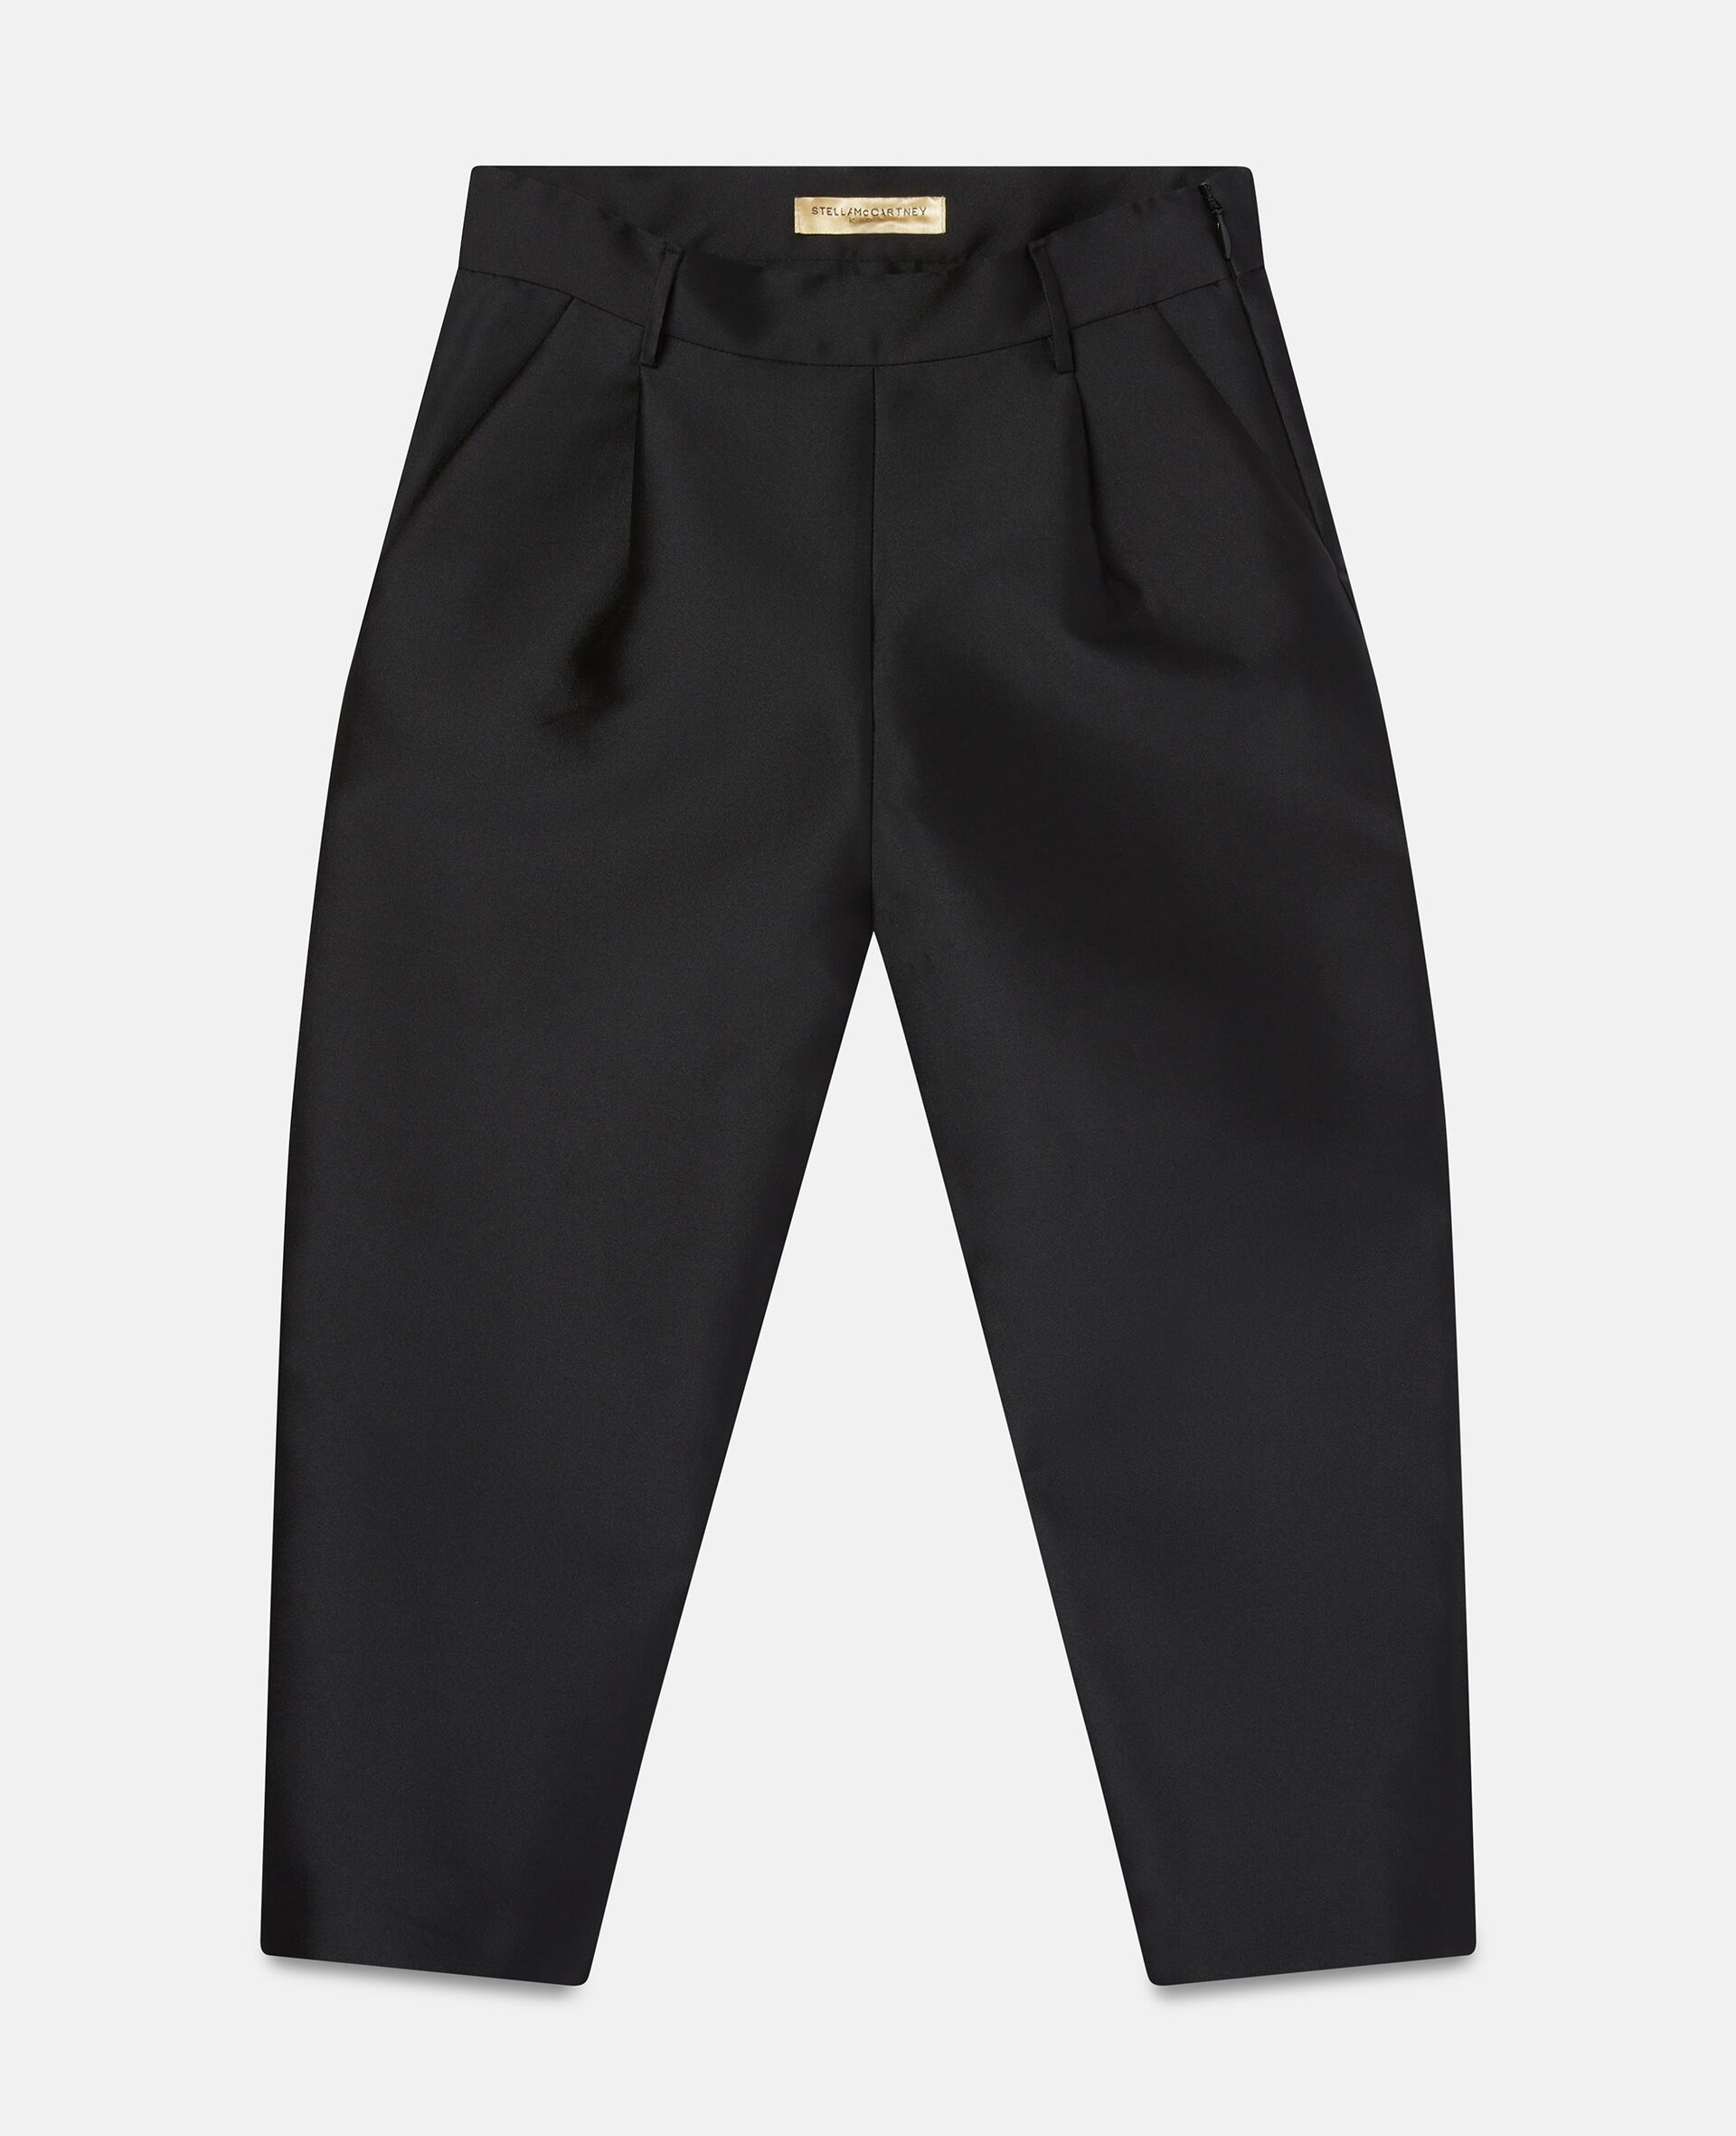 Suit Trousers-Black-large image number 0